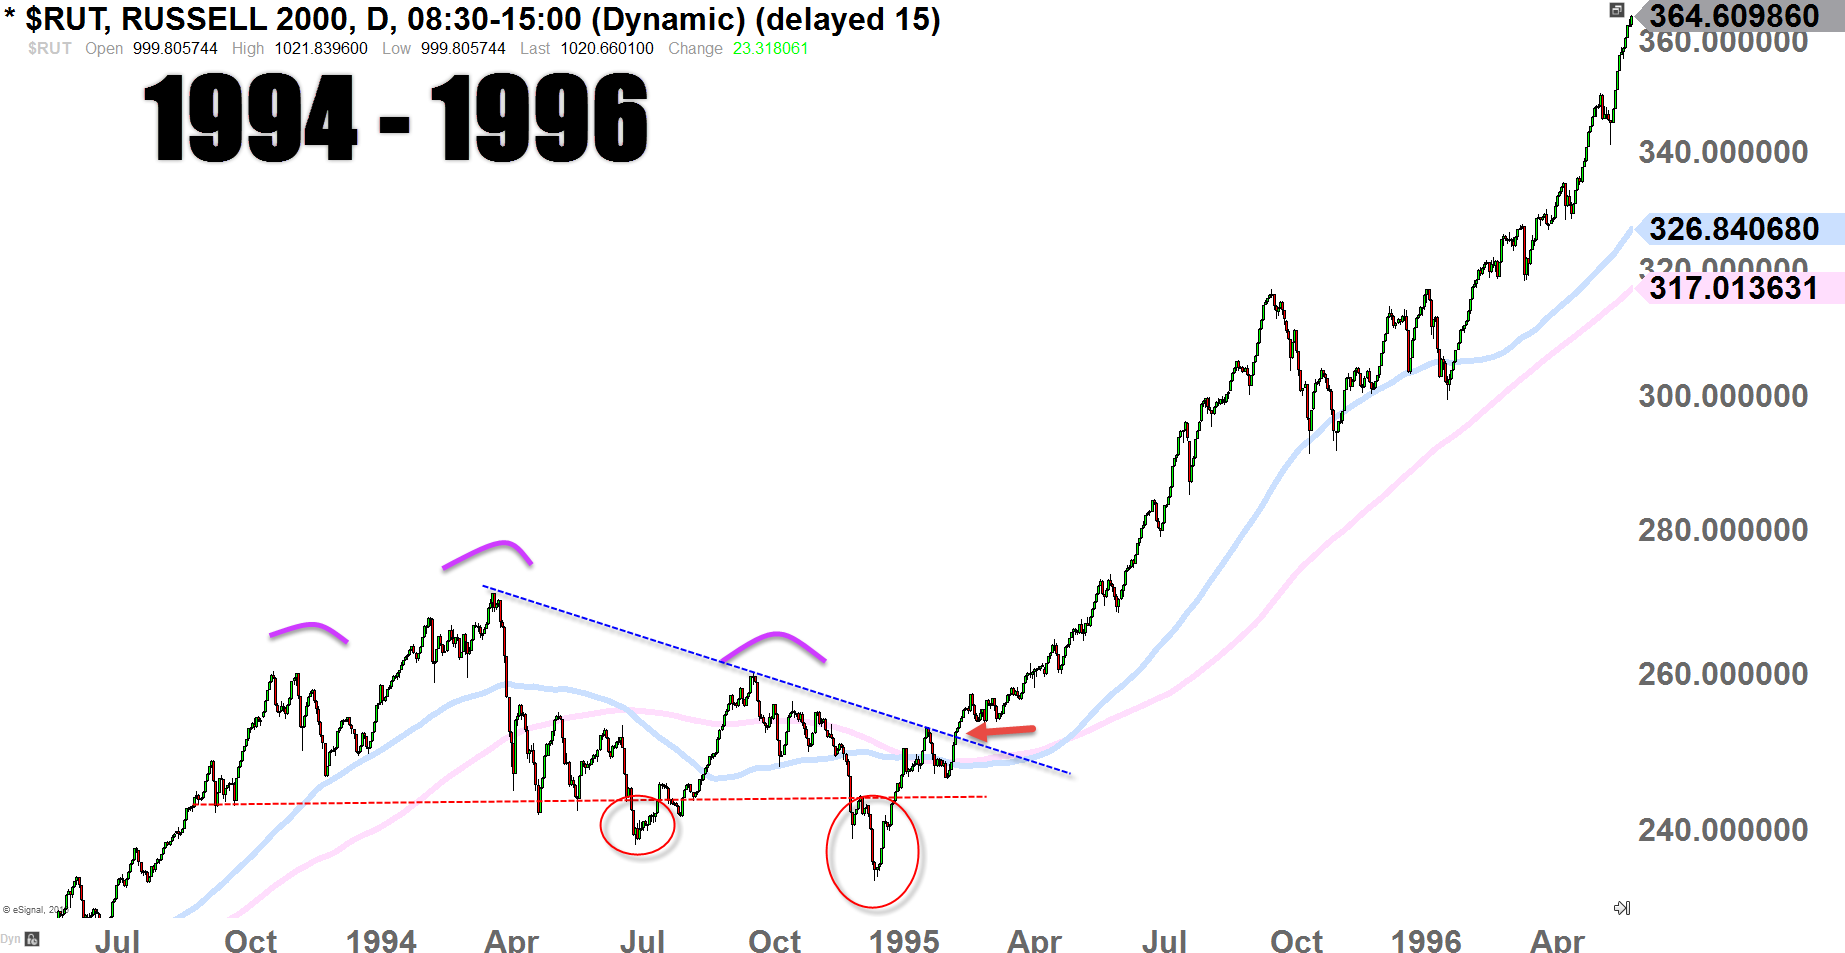 Russell 2000 Index Daily-Chart 1994 - 1996